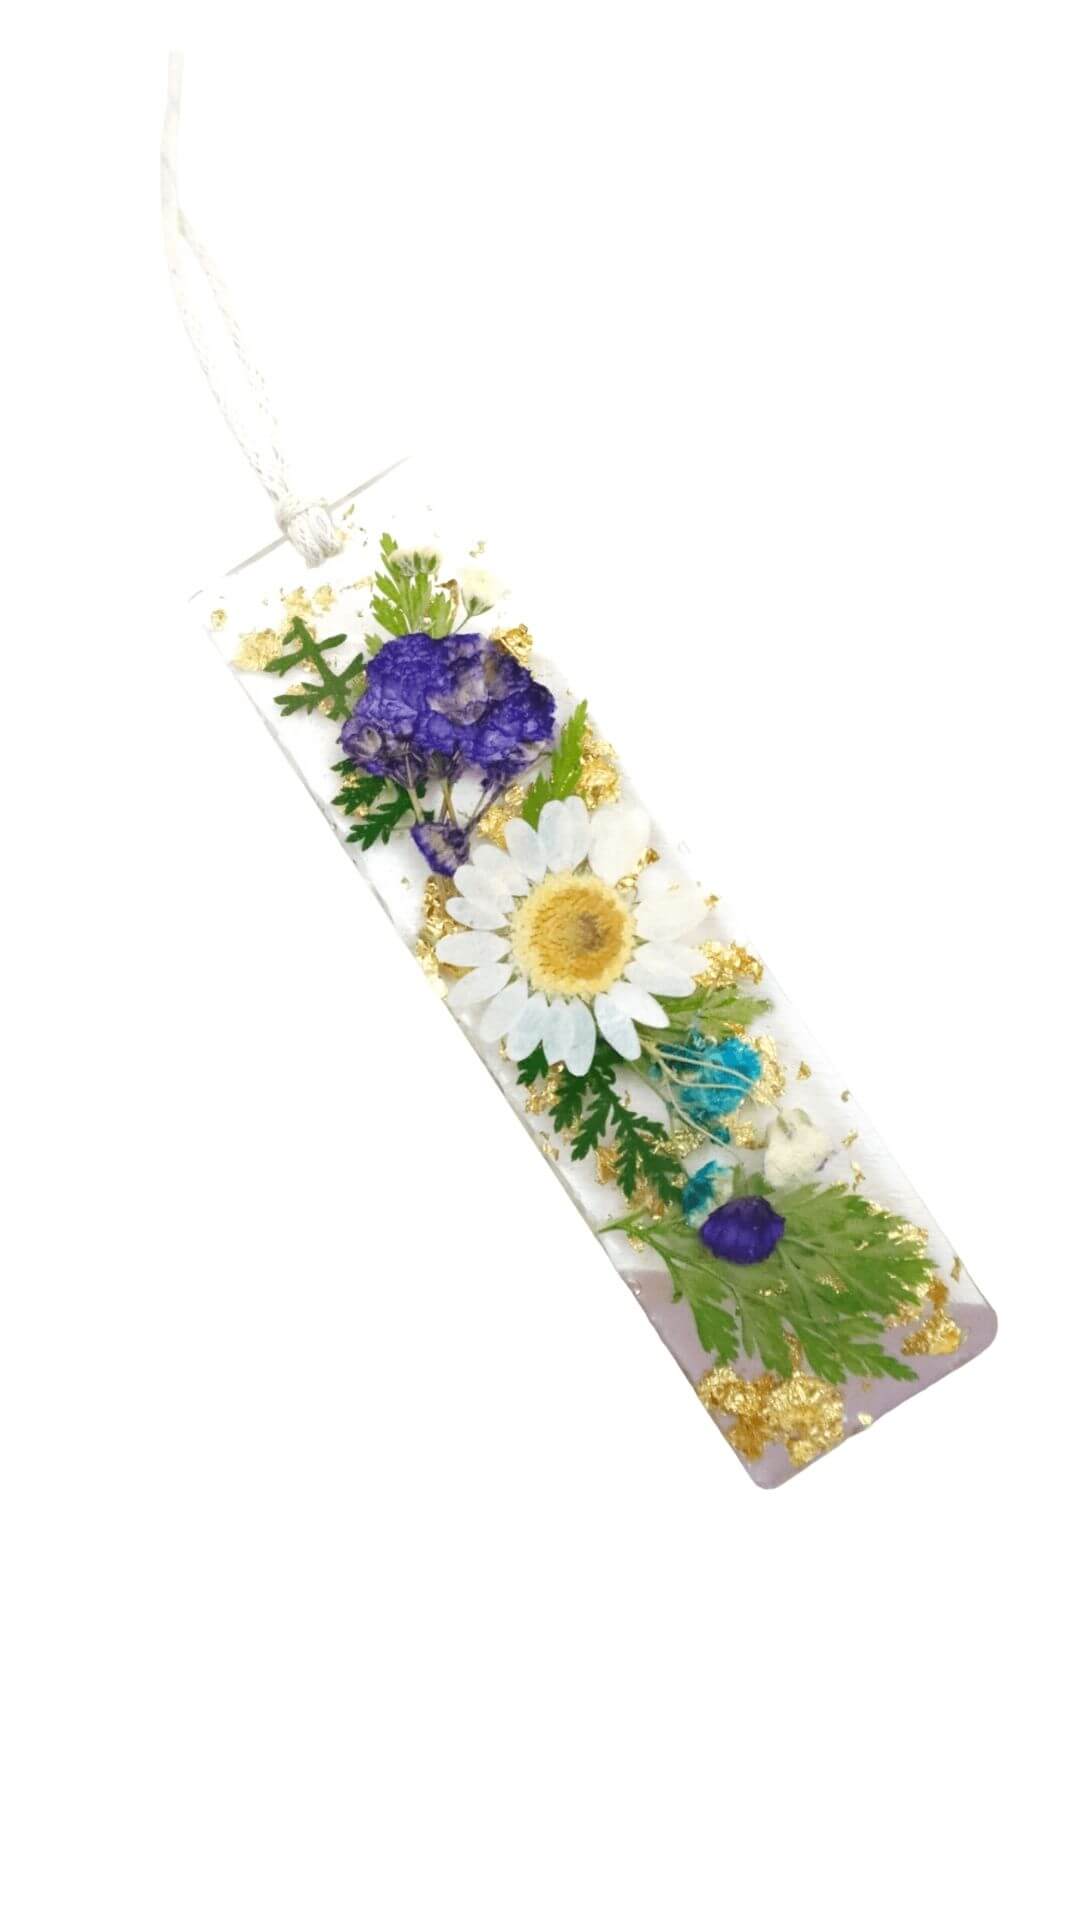 Pressed-Flower-Resin-Bookmarks-Handmade-Bookmarks-Made-With-Real-Flowers-Kaleidoscopes-And-Polka-Dots